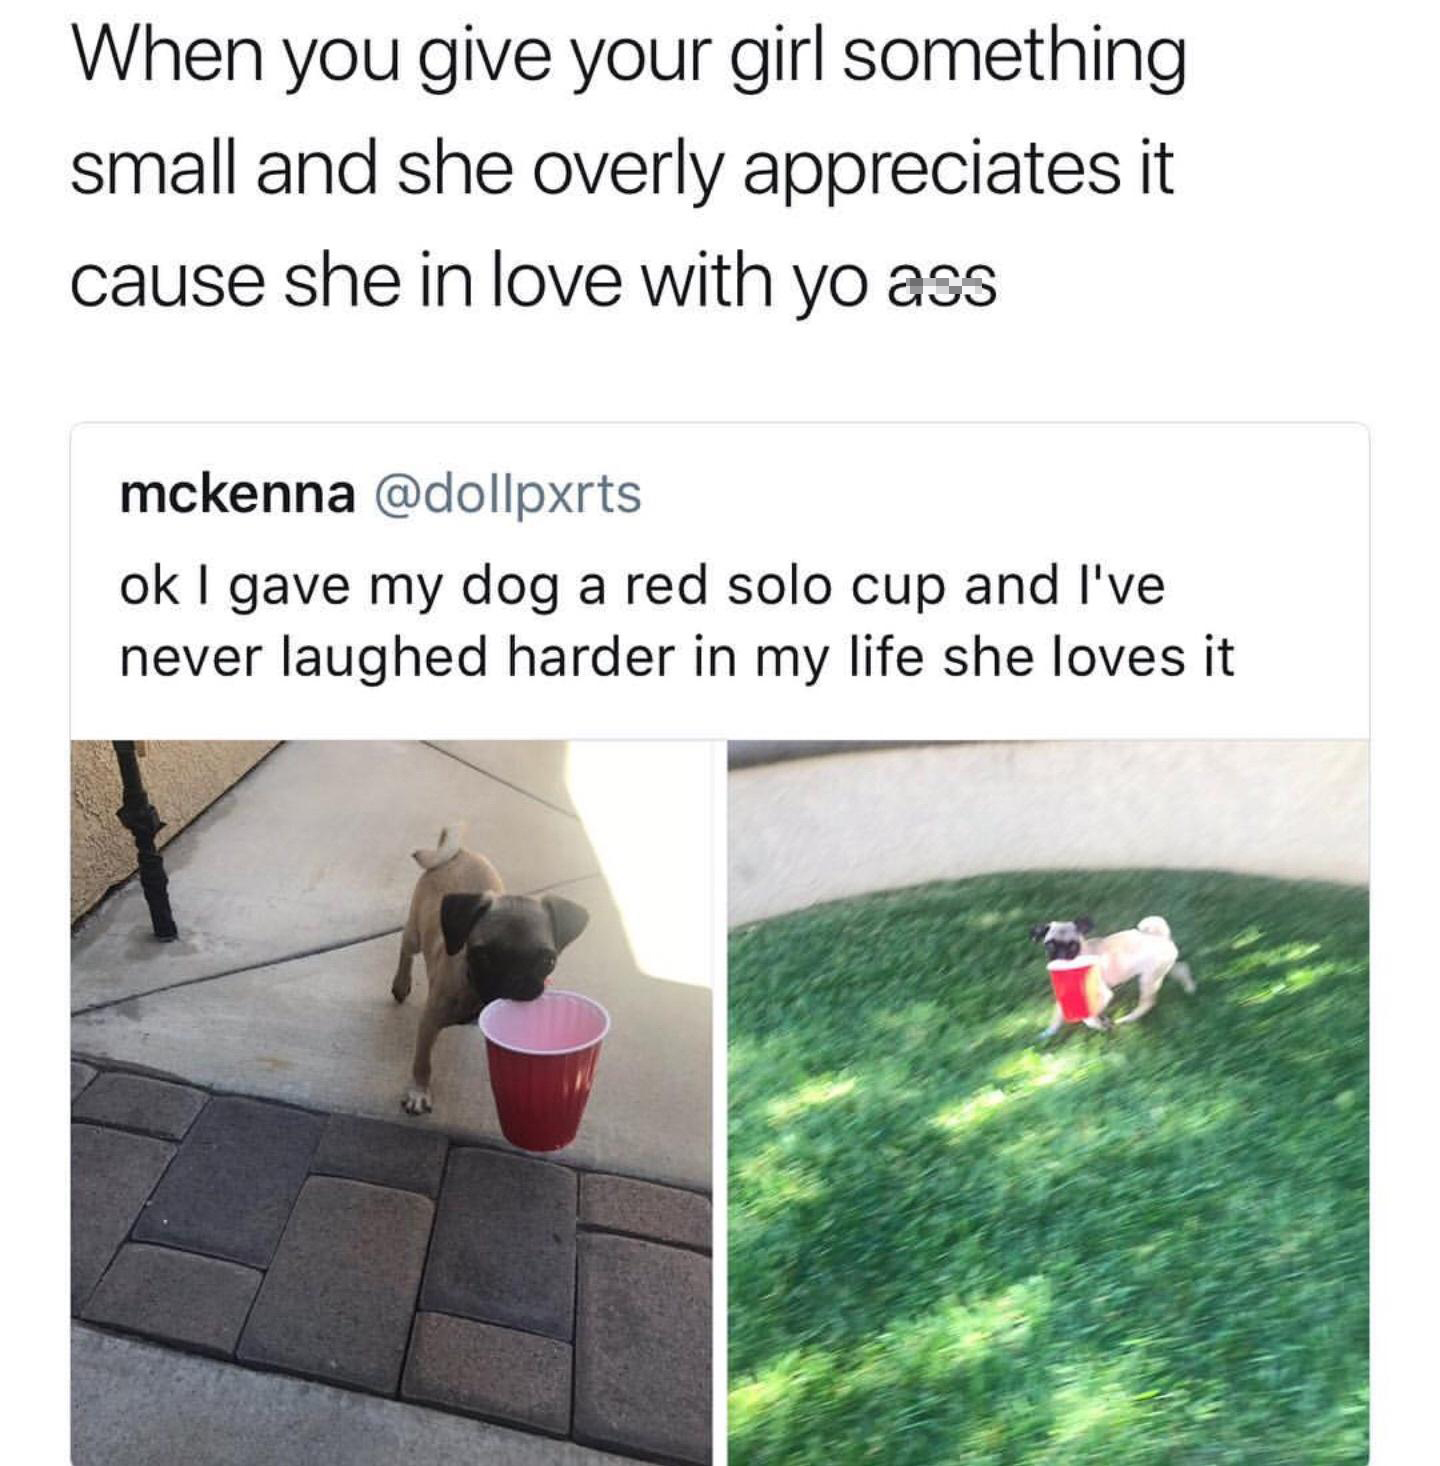 grass - When you give your girl something small and she overly appreciates it cause she in love with yo ass mckenna ok I gave my dog a red solo cup and I've never laughed harder in my life she loves it